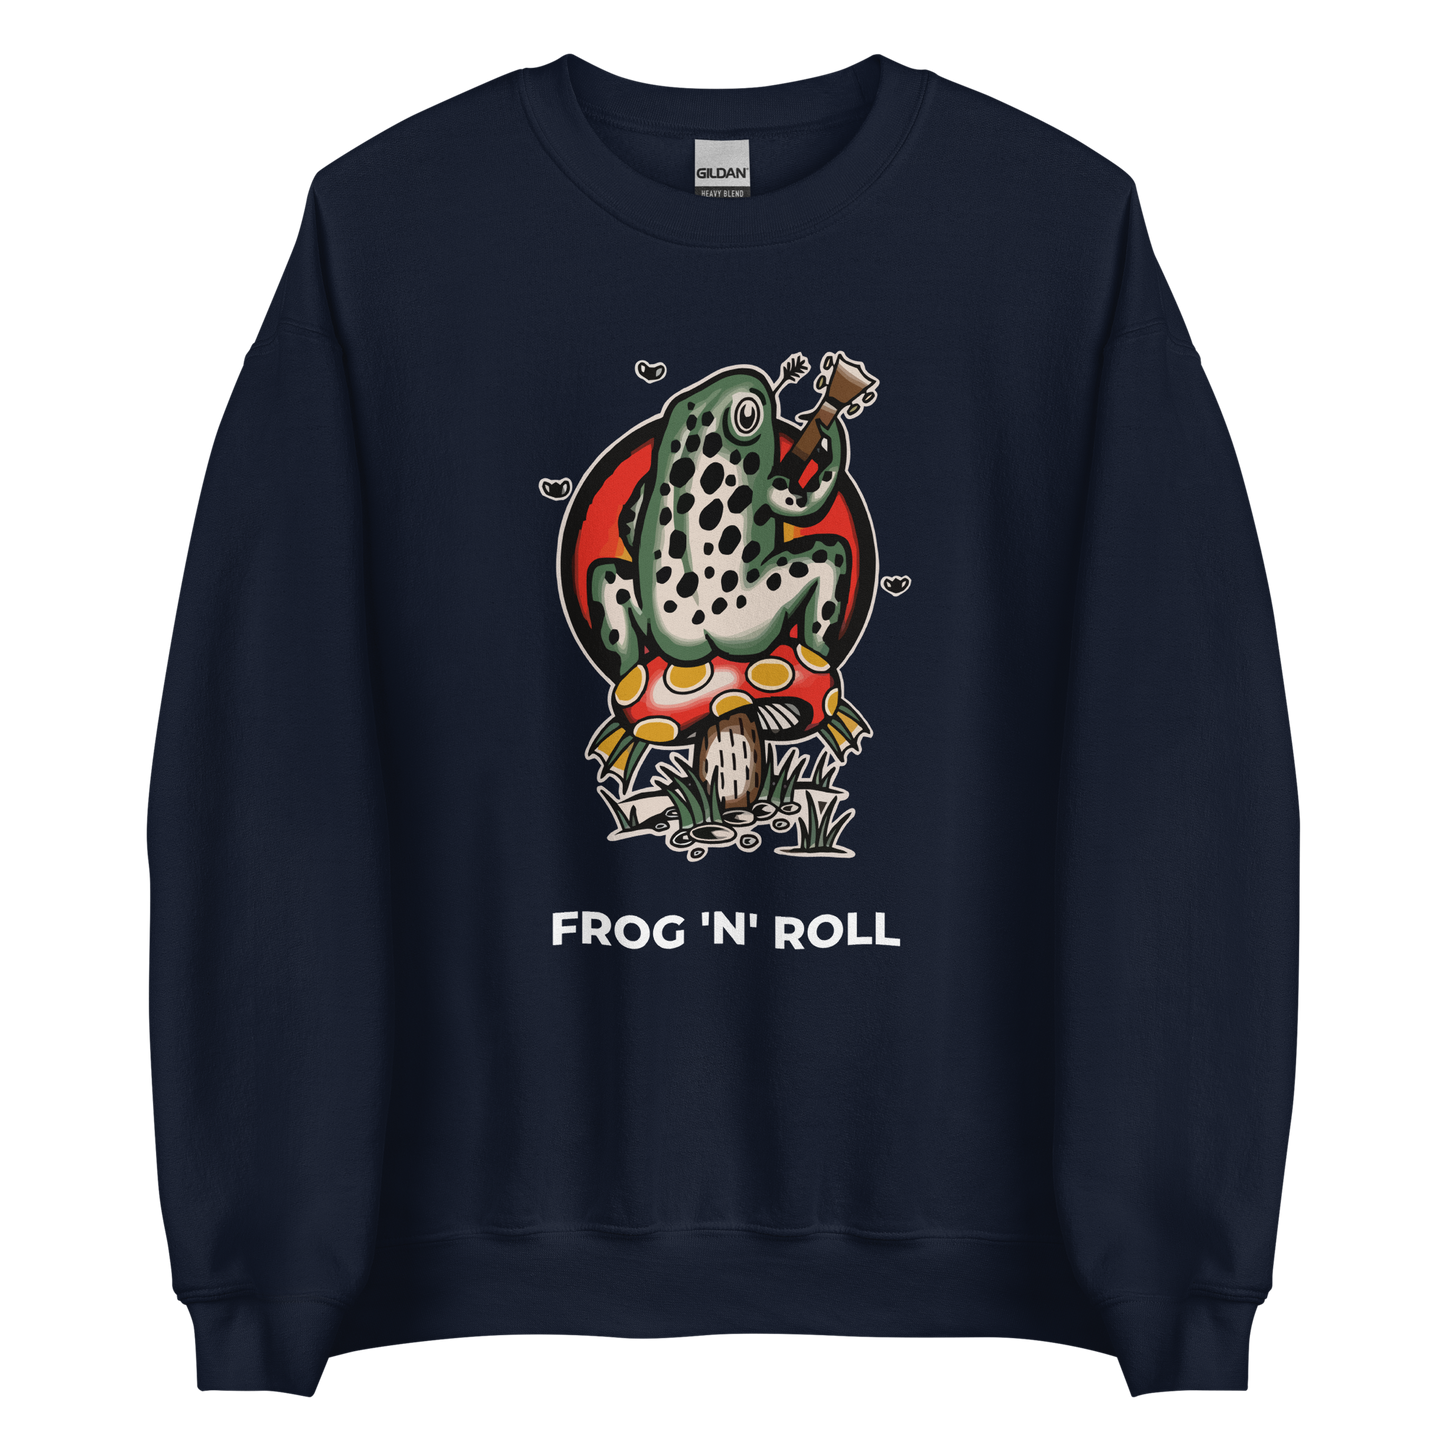 Navy Frog Sweatshirt featuring the hilarious Frog 'n' Roll graphic on the chest - Funny Graphic Frog Sweatshirts - Boozy Fox